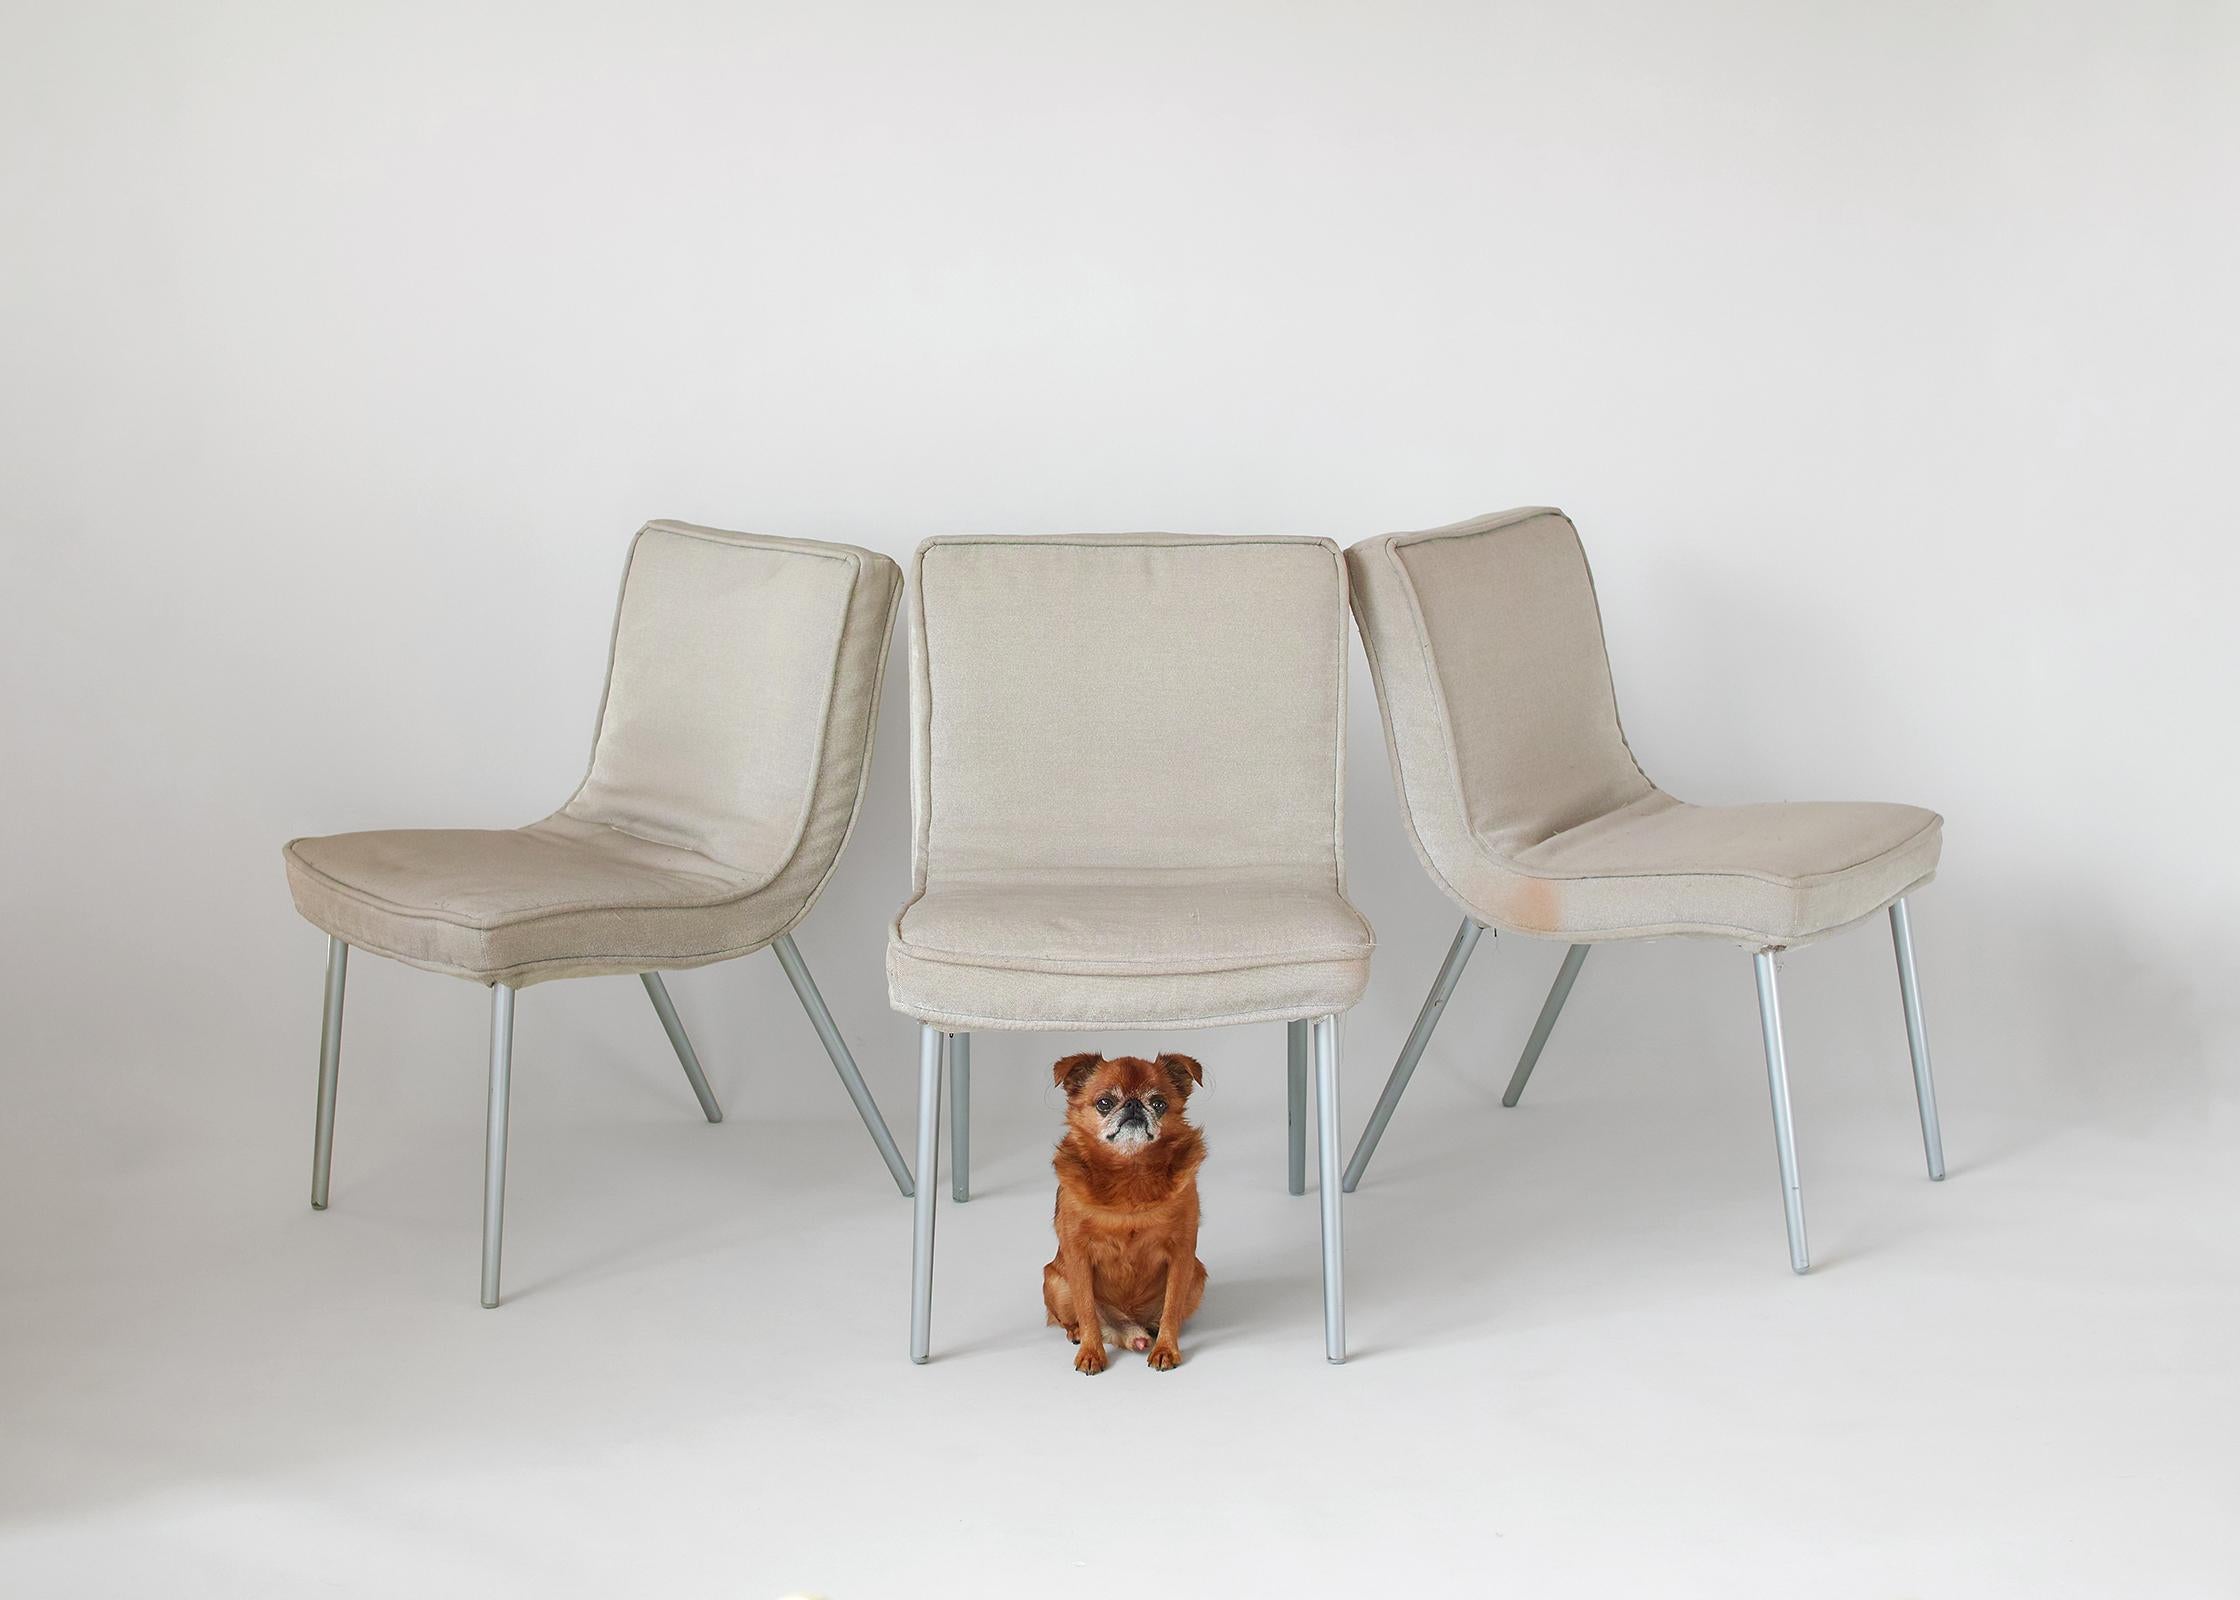 For your consideration are these three, all-original Ligne Roset French modern dining chairs attributed to Christian Werner. Sturdy and comfortable, they feature a scoop form with original gray upholstery and tubular steel legs with metallic gray